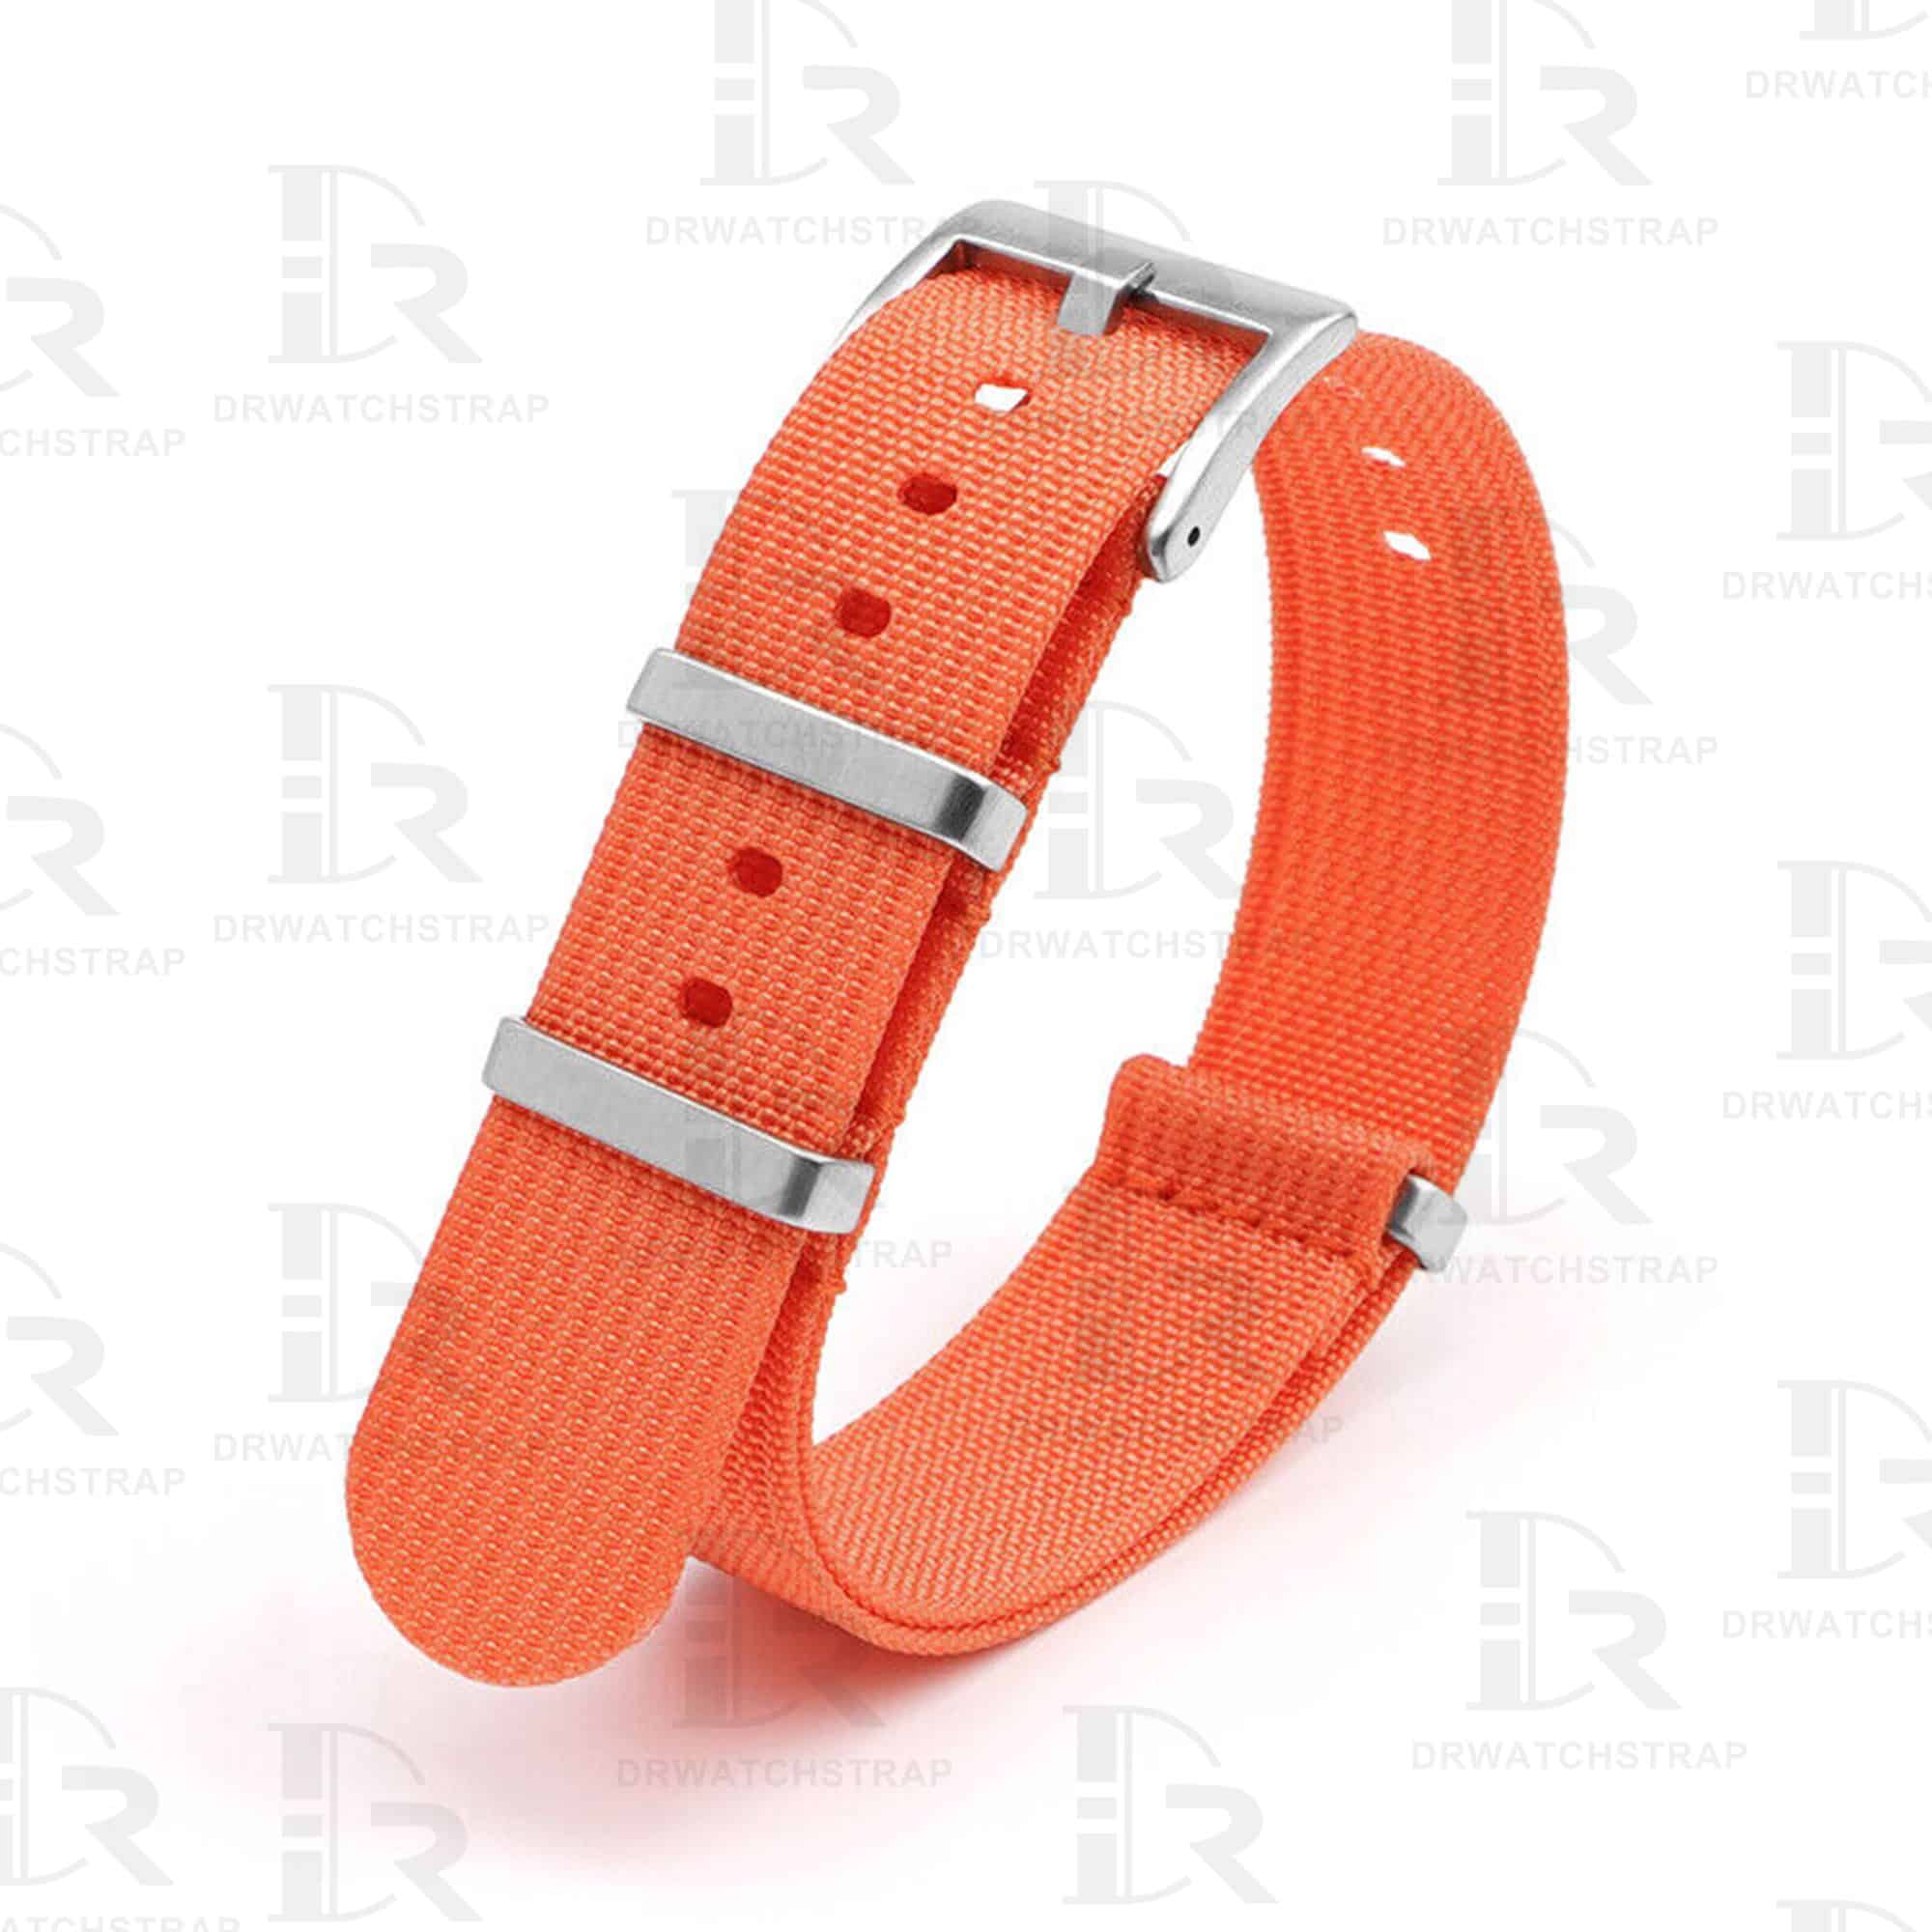 Buy Omega and swatch Moonswatch Nato strap 20mm Orange watch band (1)